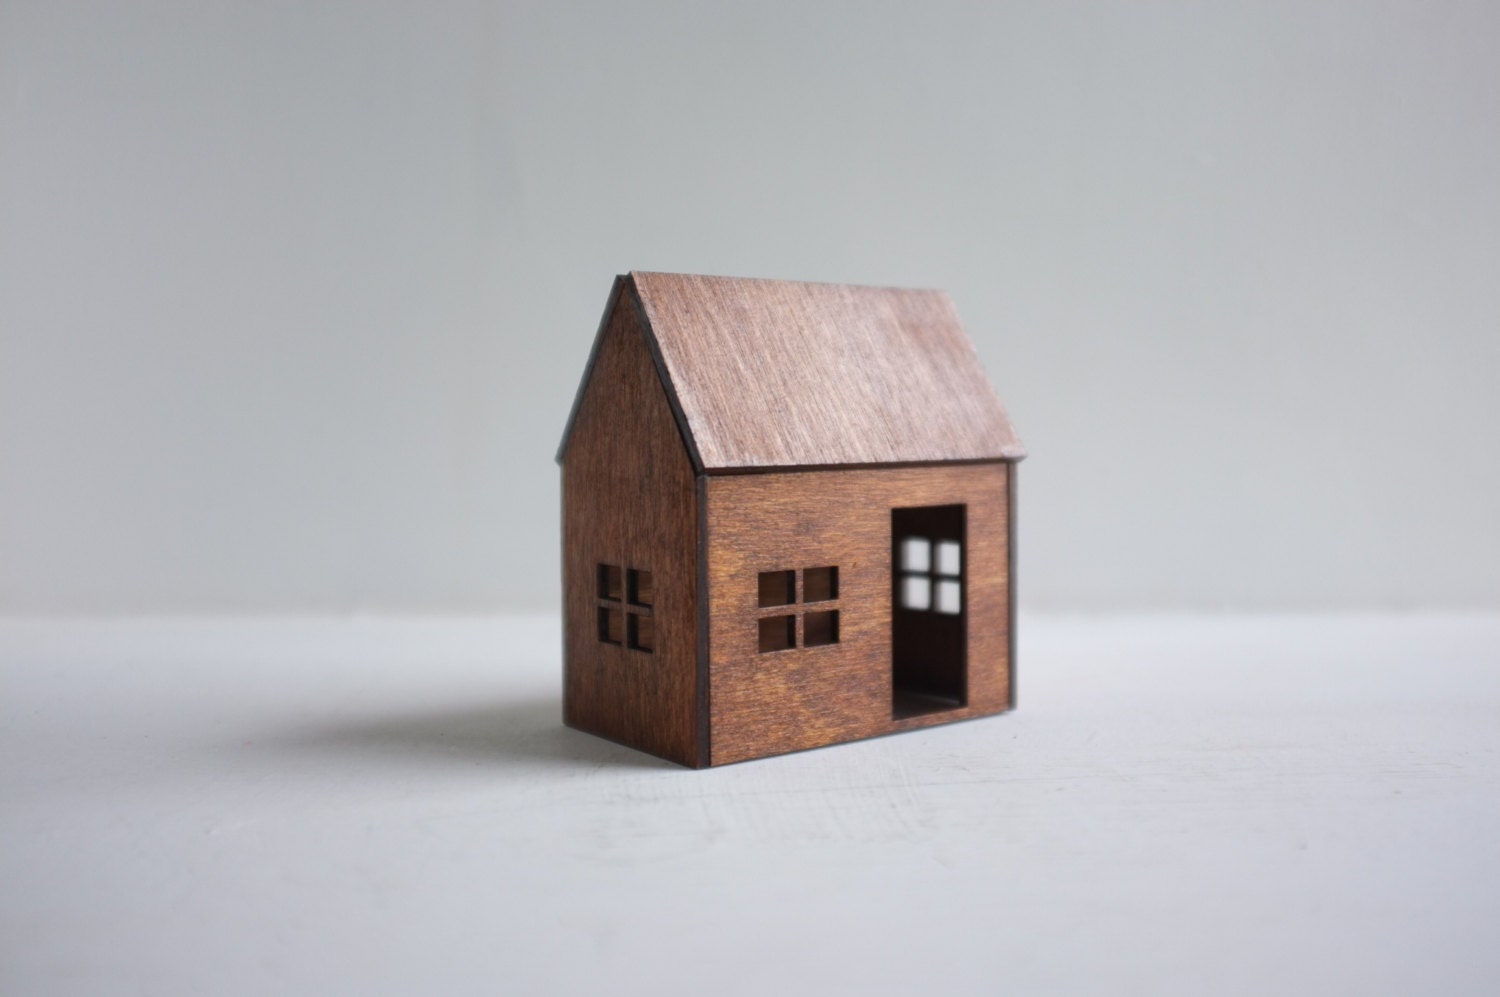 Small birch house - little wooden cabin in golden mahogany finish - honey color miniature architecture - 2of2